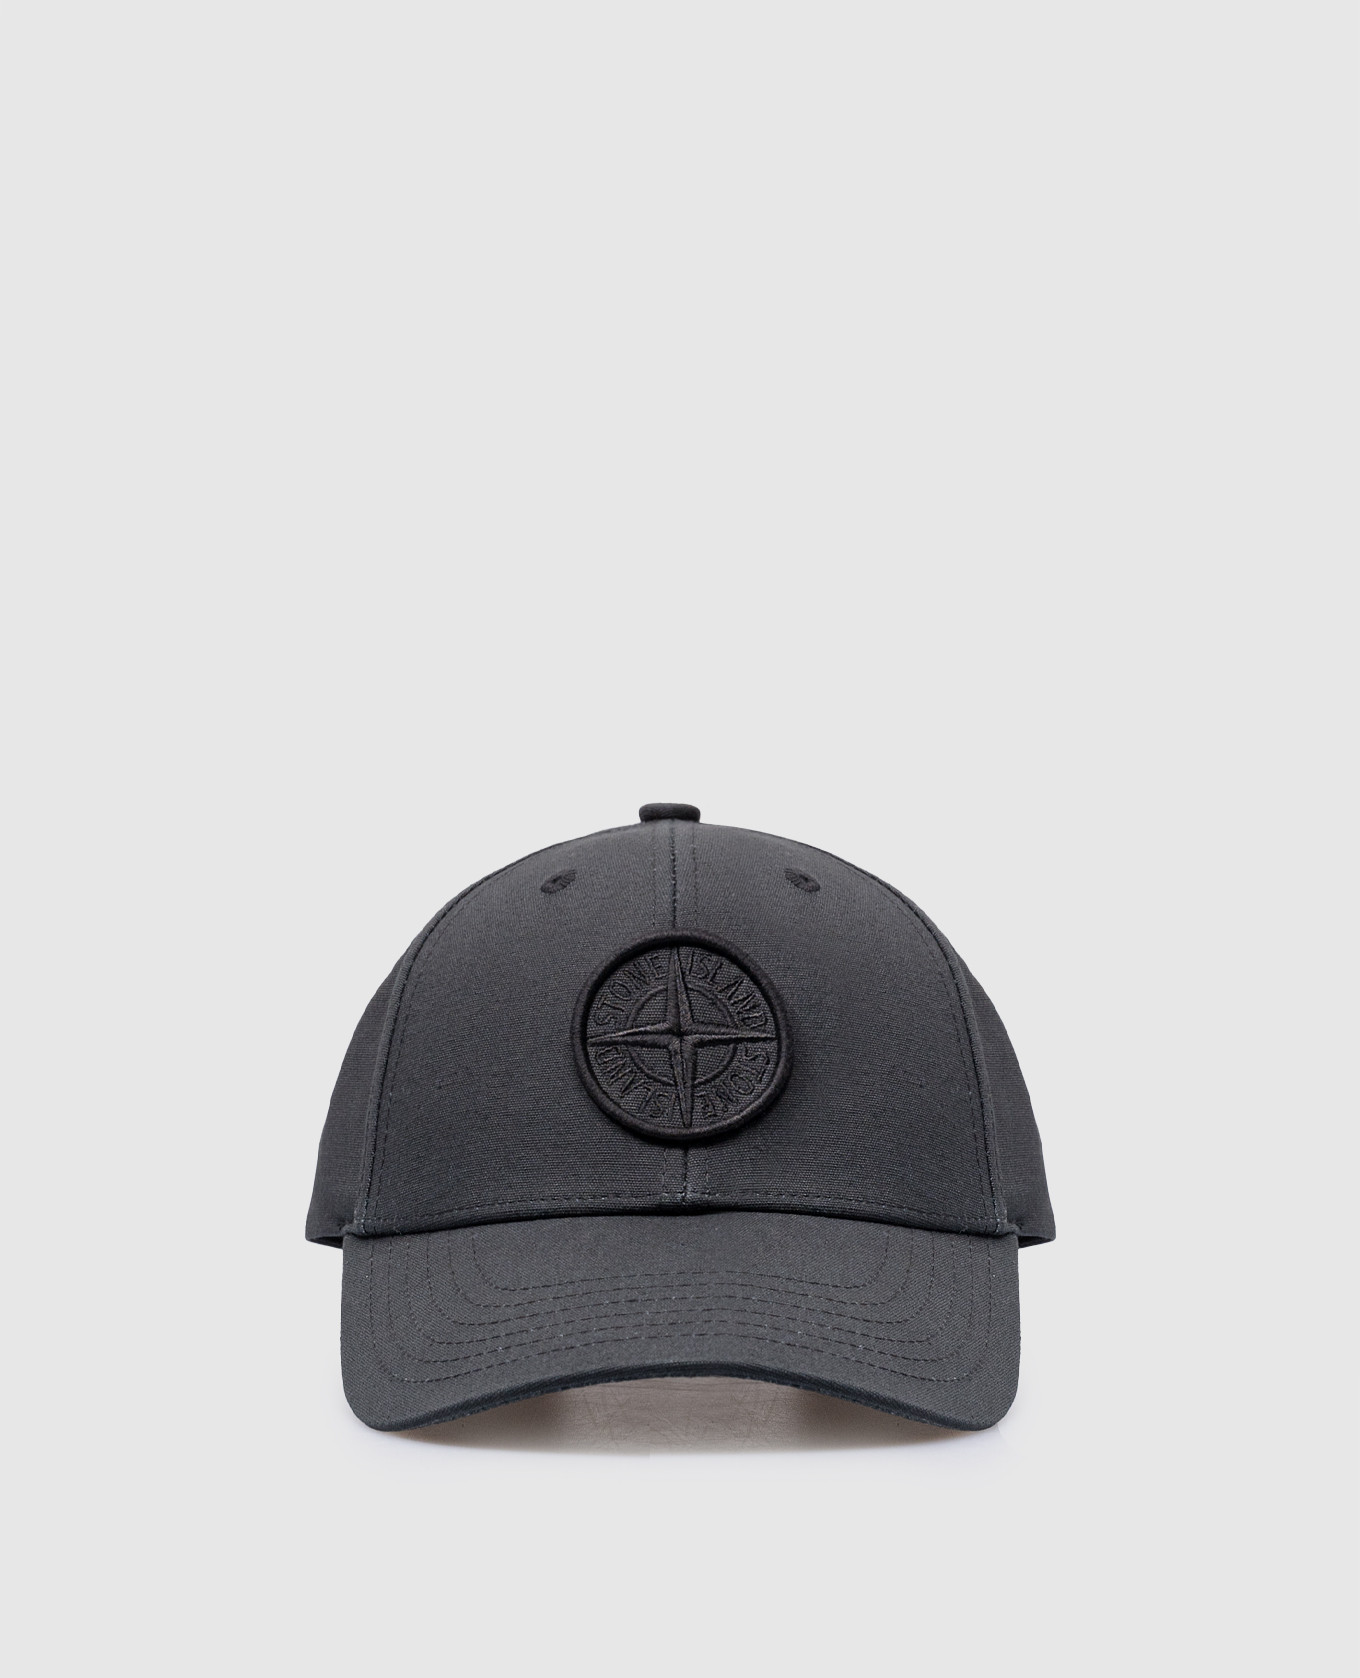 Black cap with textured logo embroidery